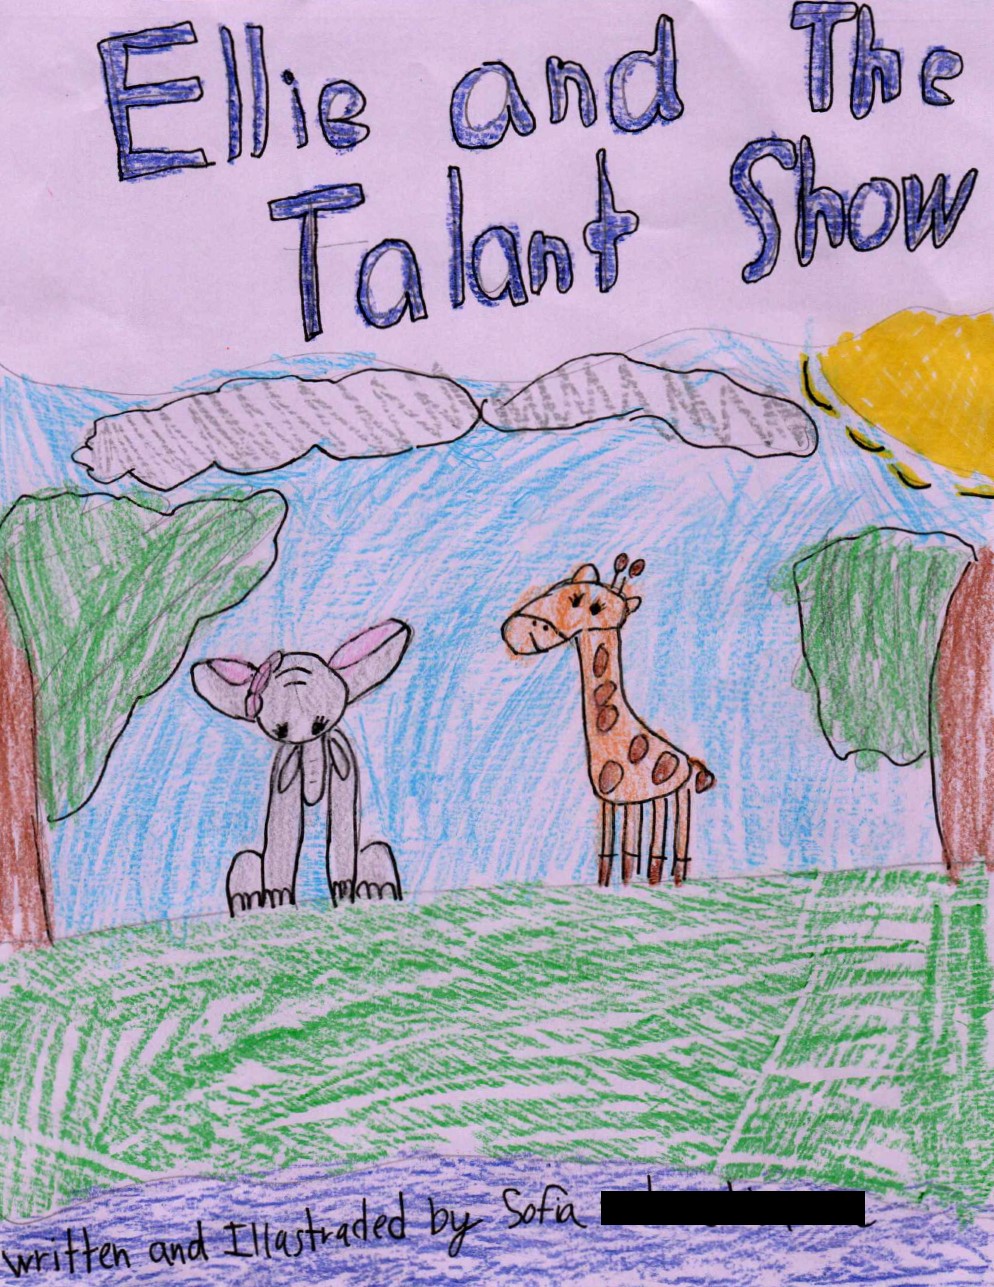 Ellie and the Talent Show by Sofia L.